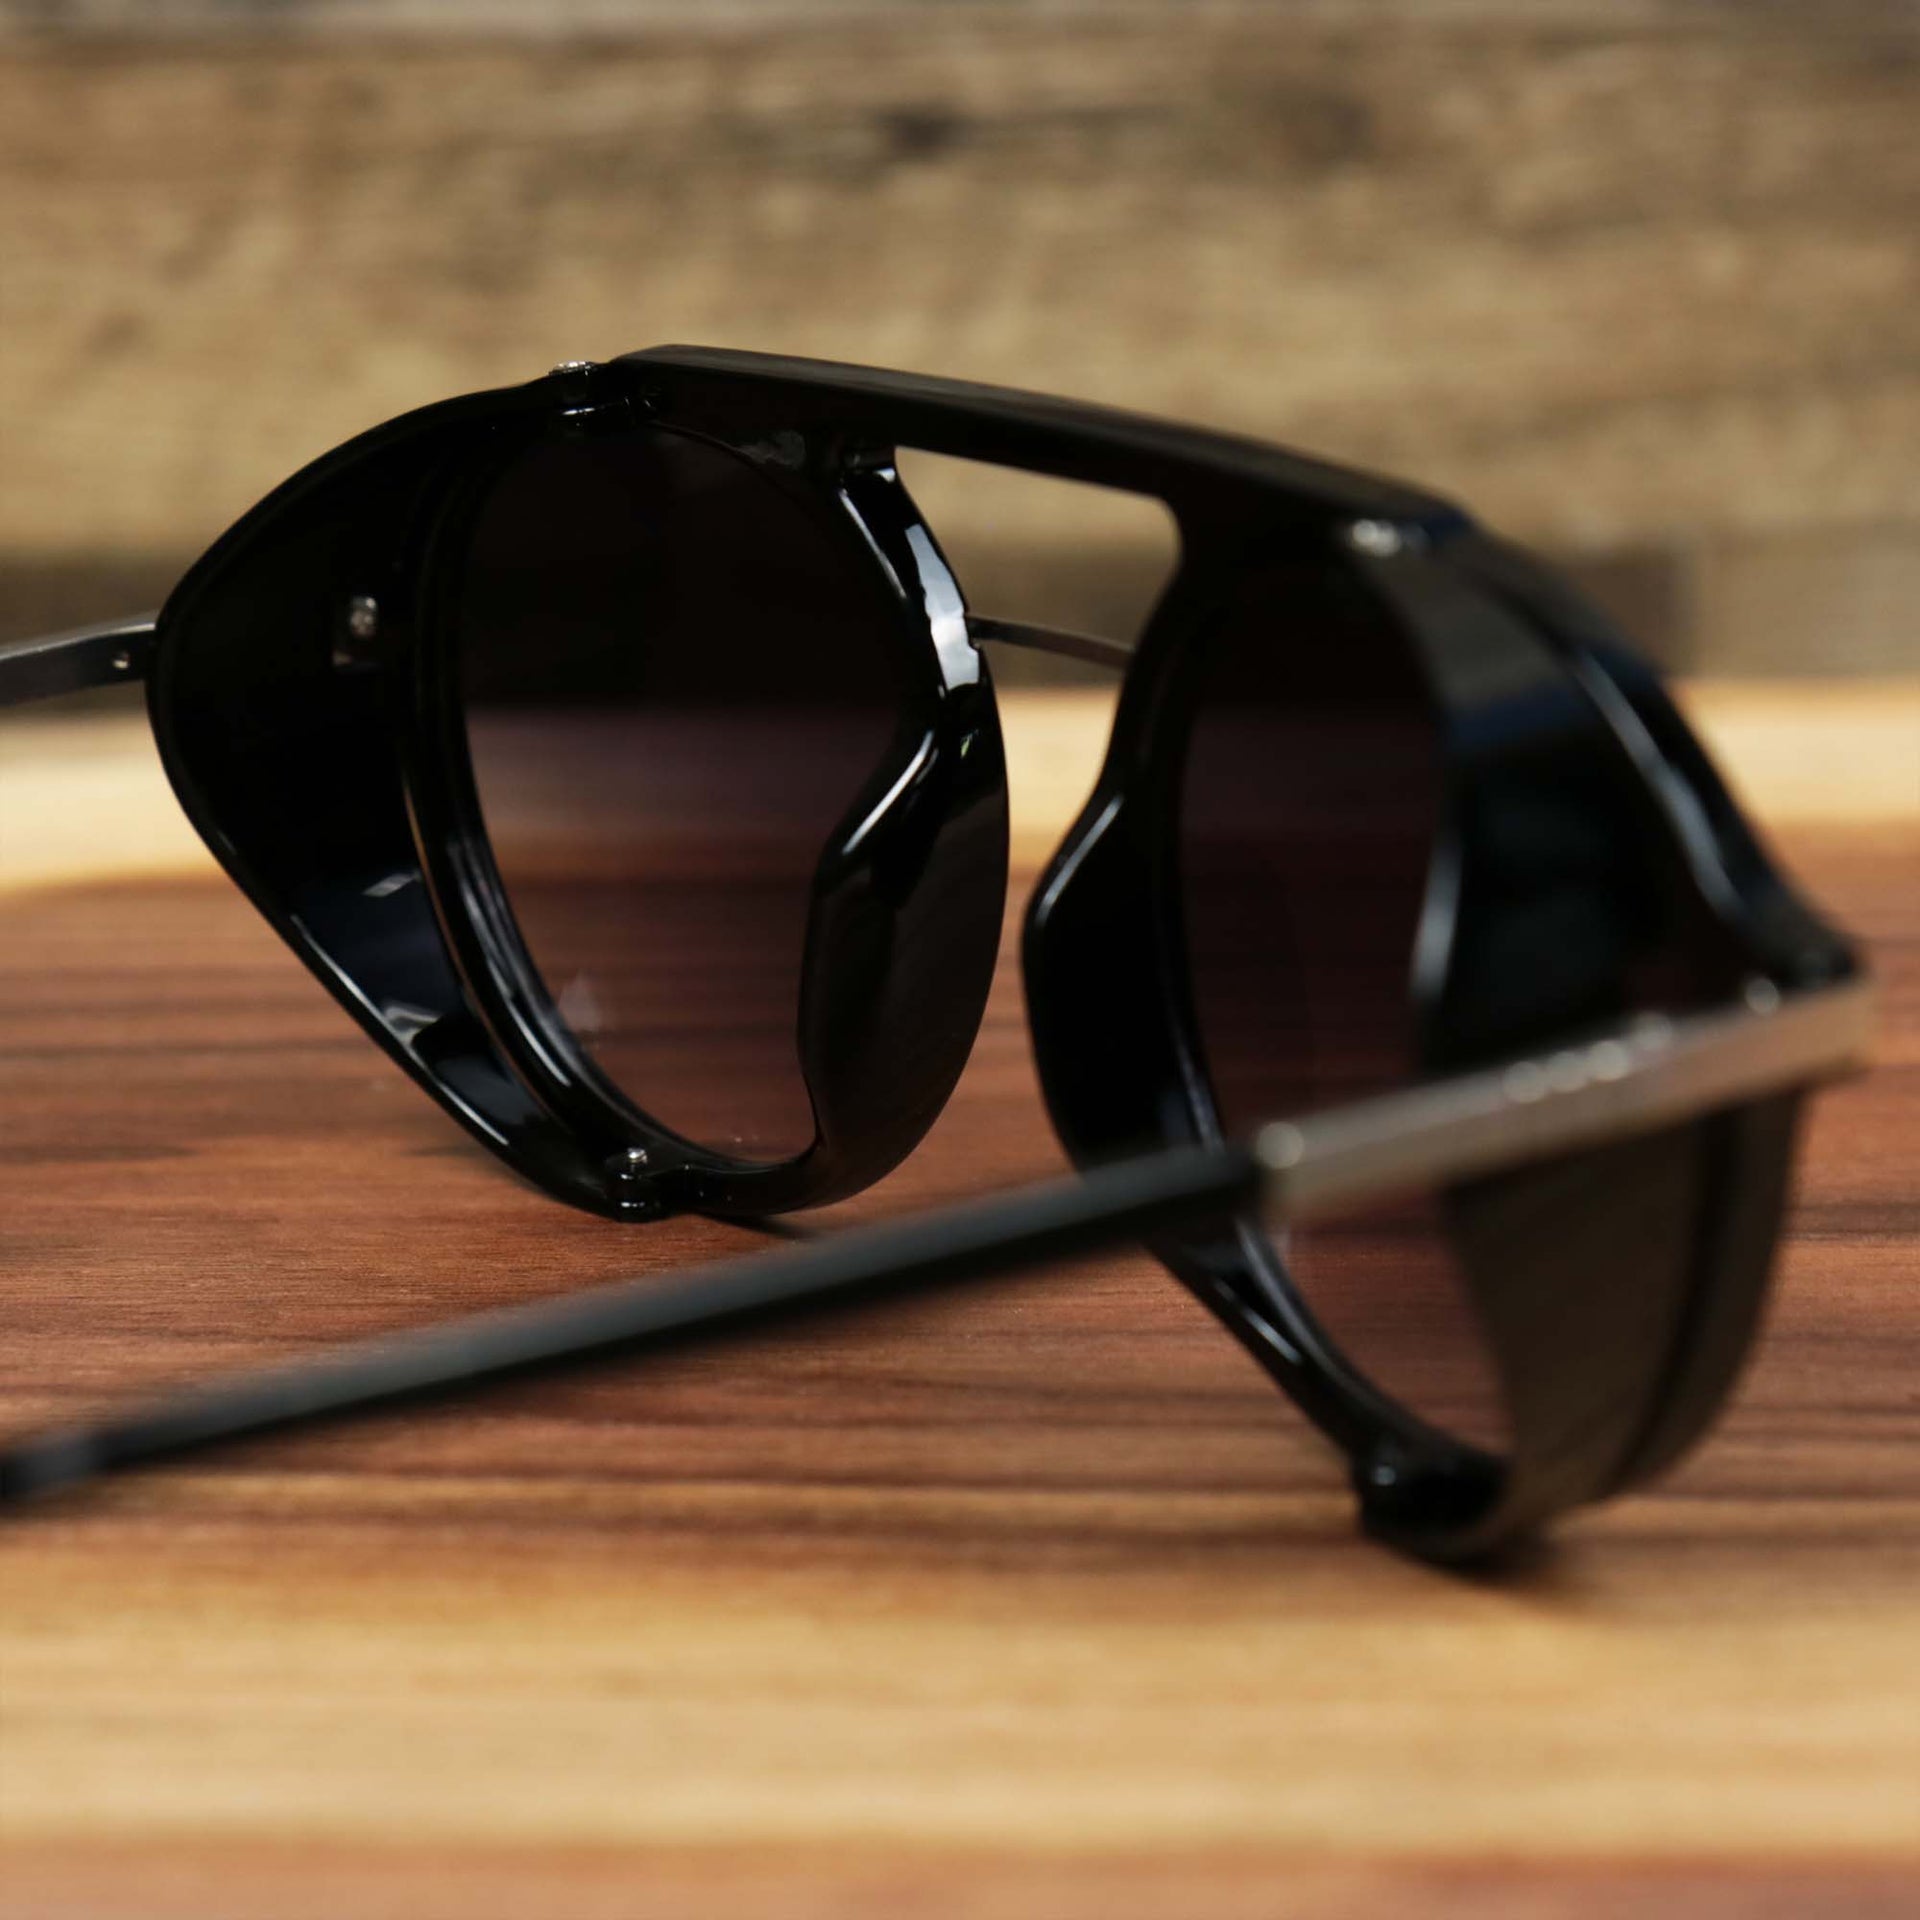 The inside of the Steampunk Frames Black Lens Sunglasses with Black Glossy Frame